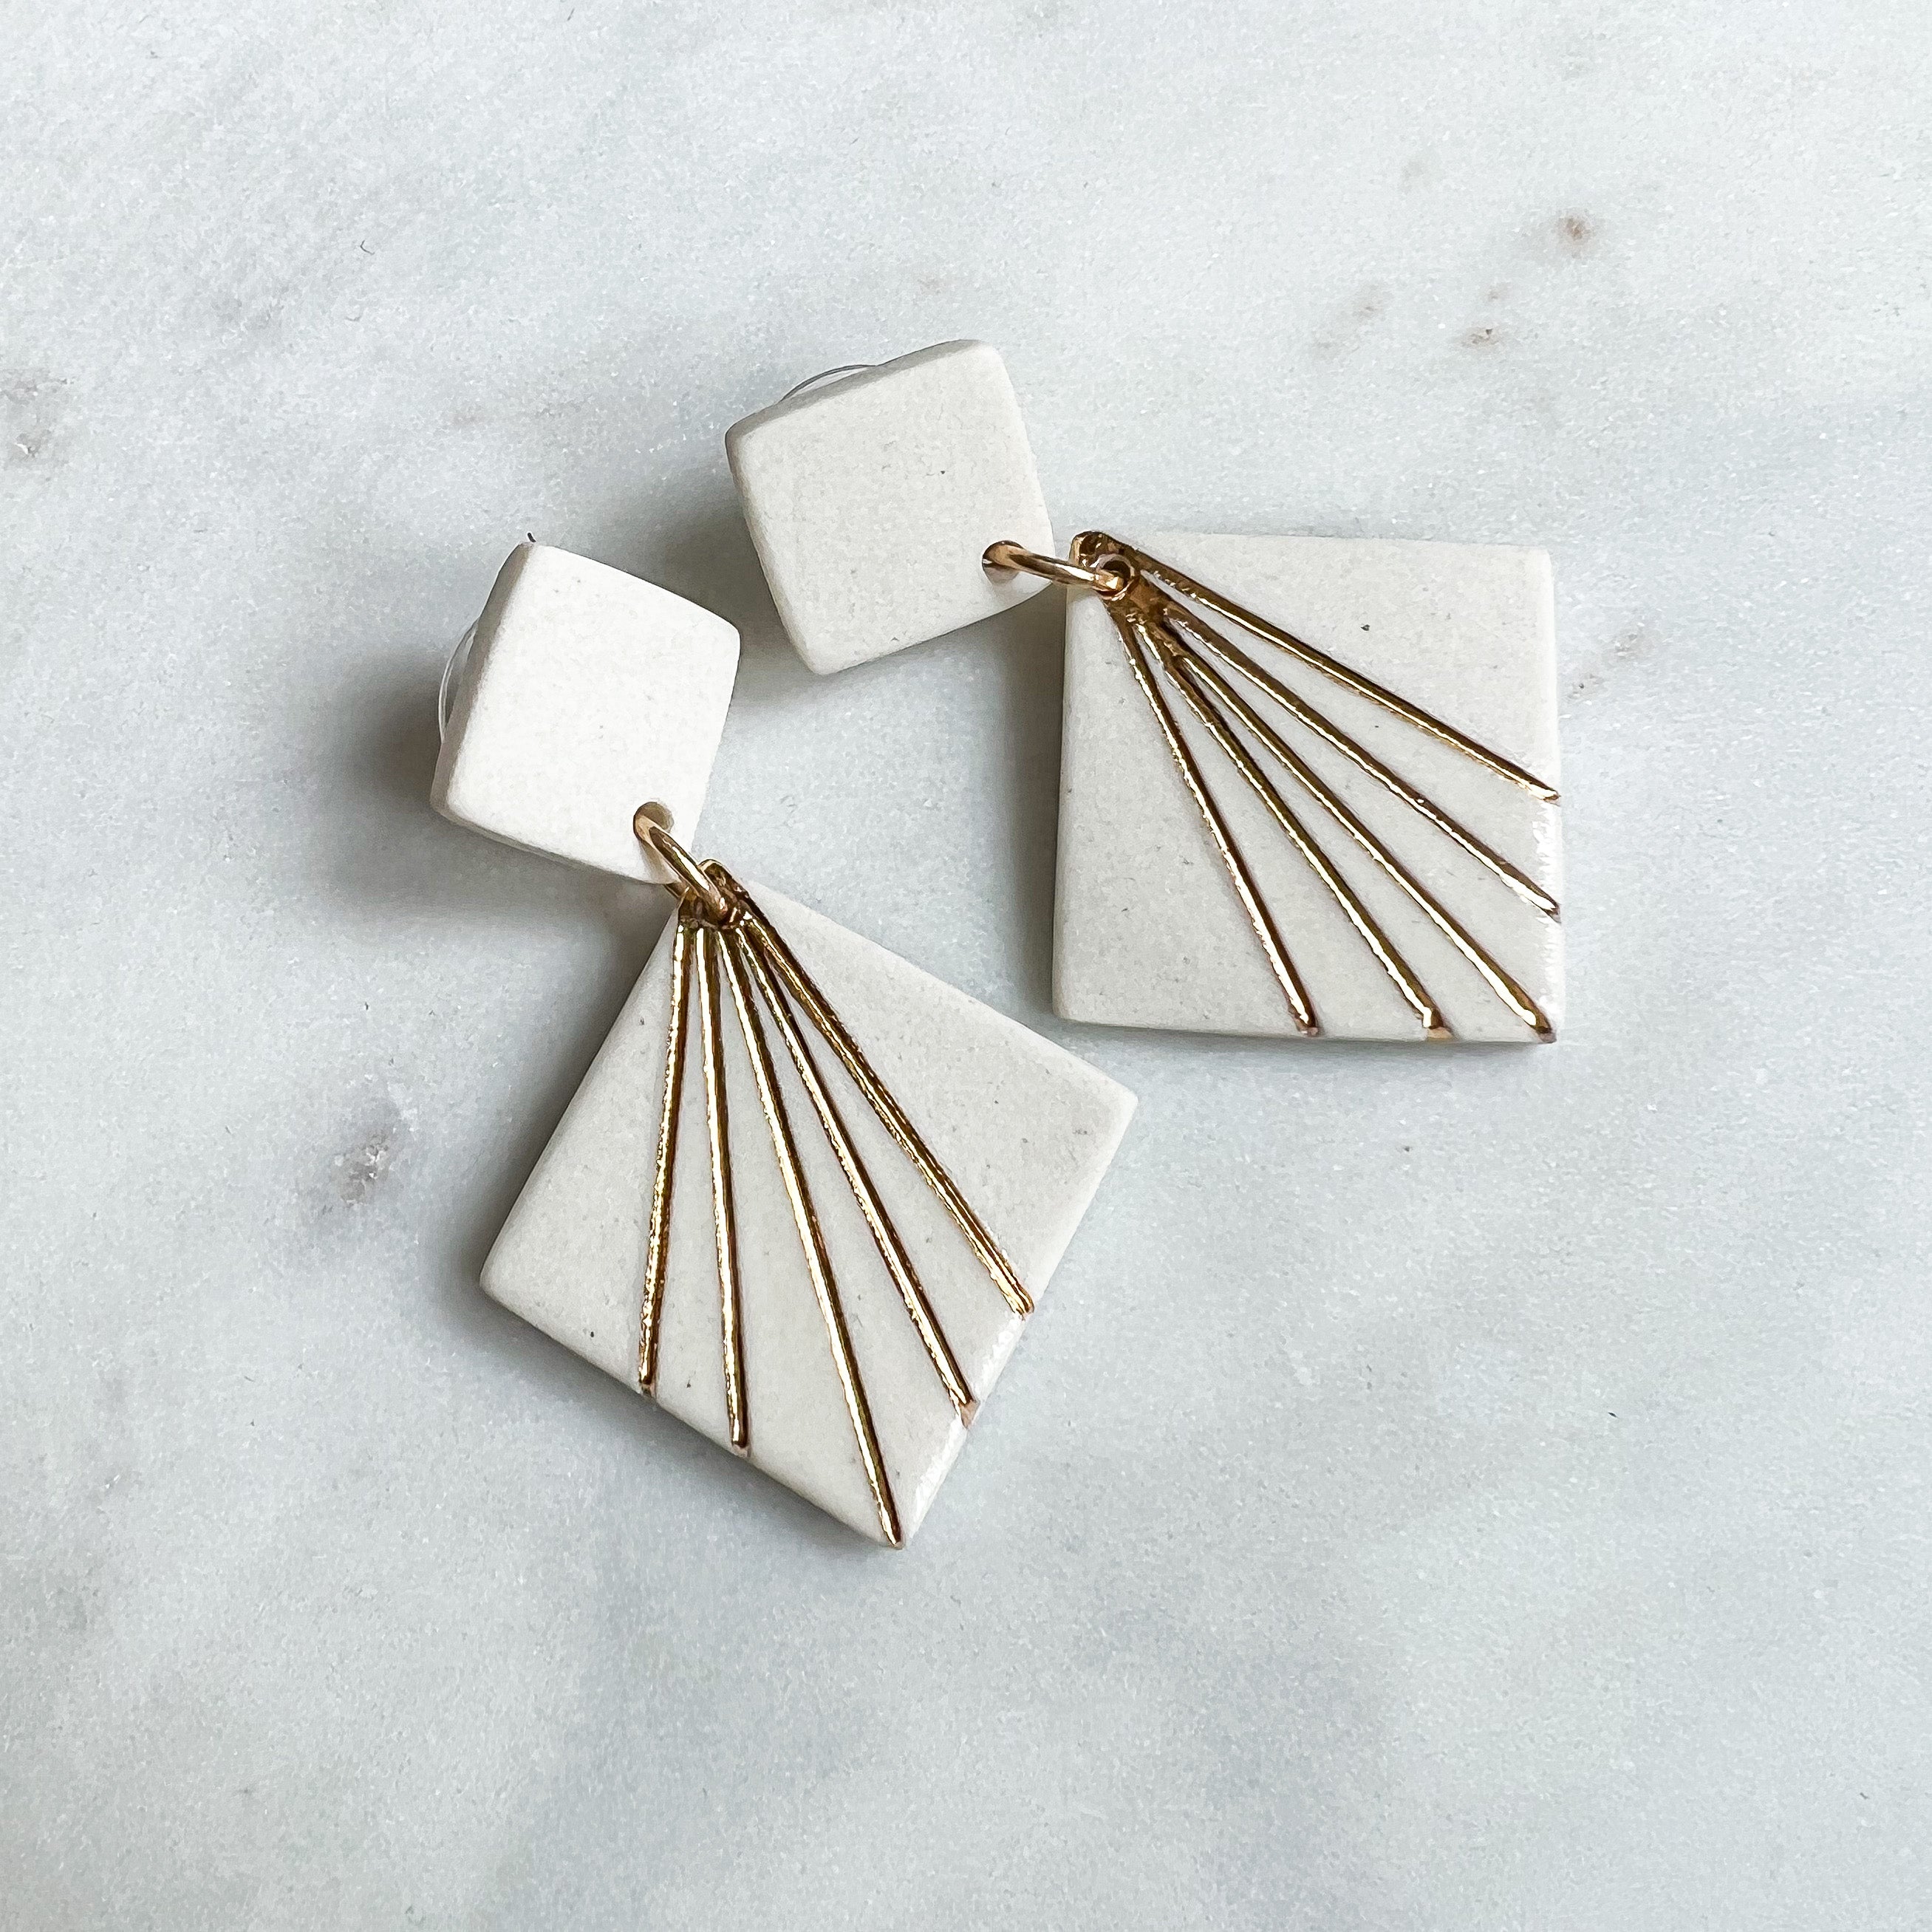 Astro White Stud Earrings with Gold Inlay by AMBER E LEA